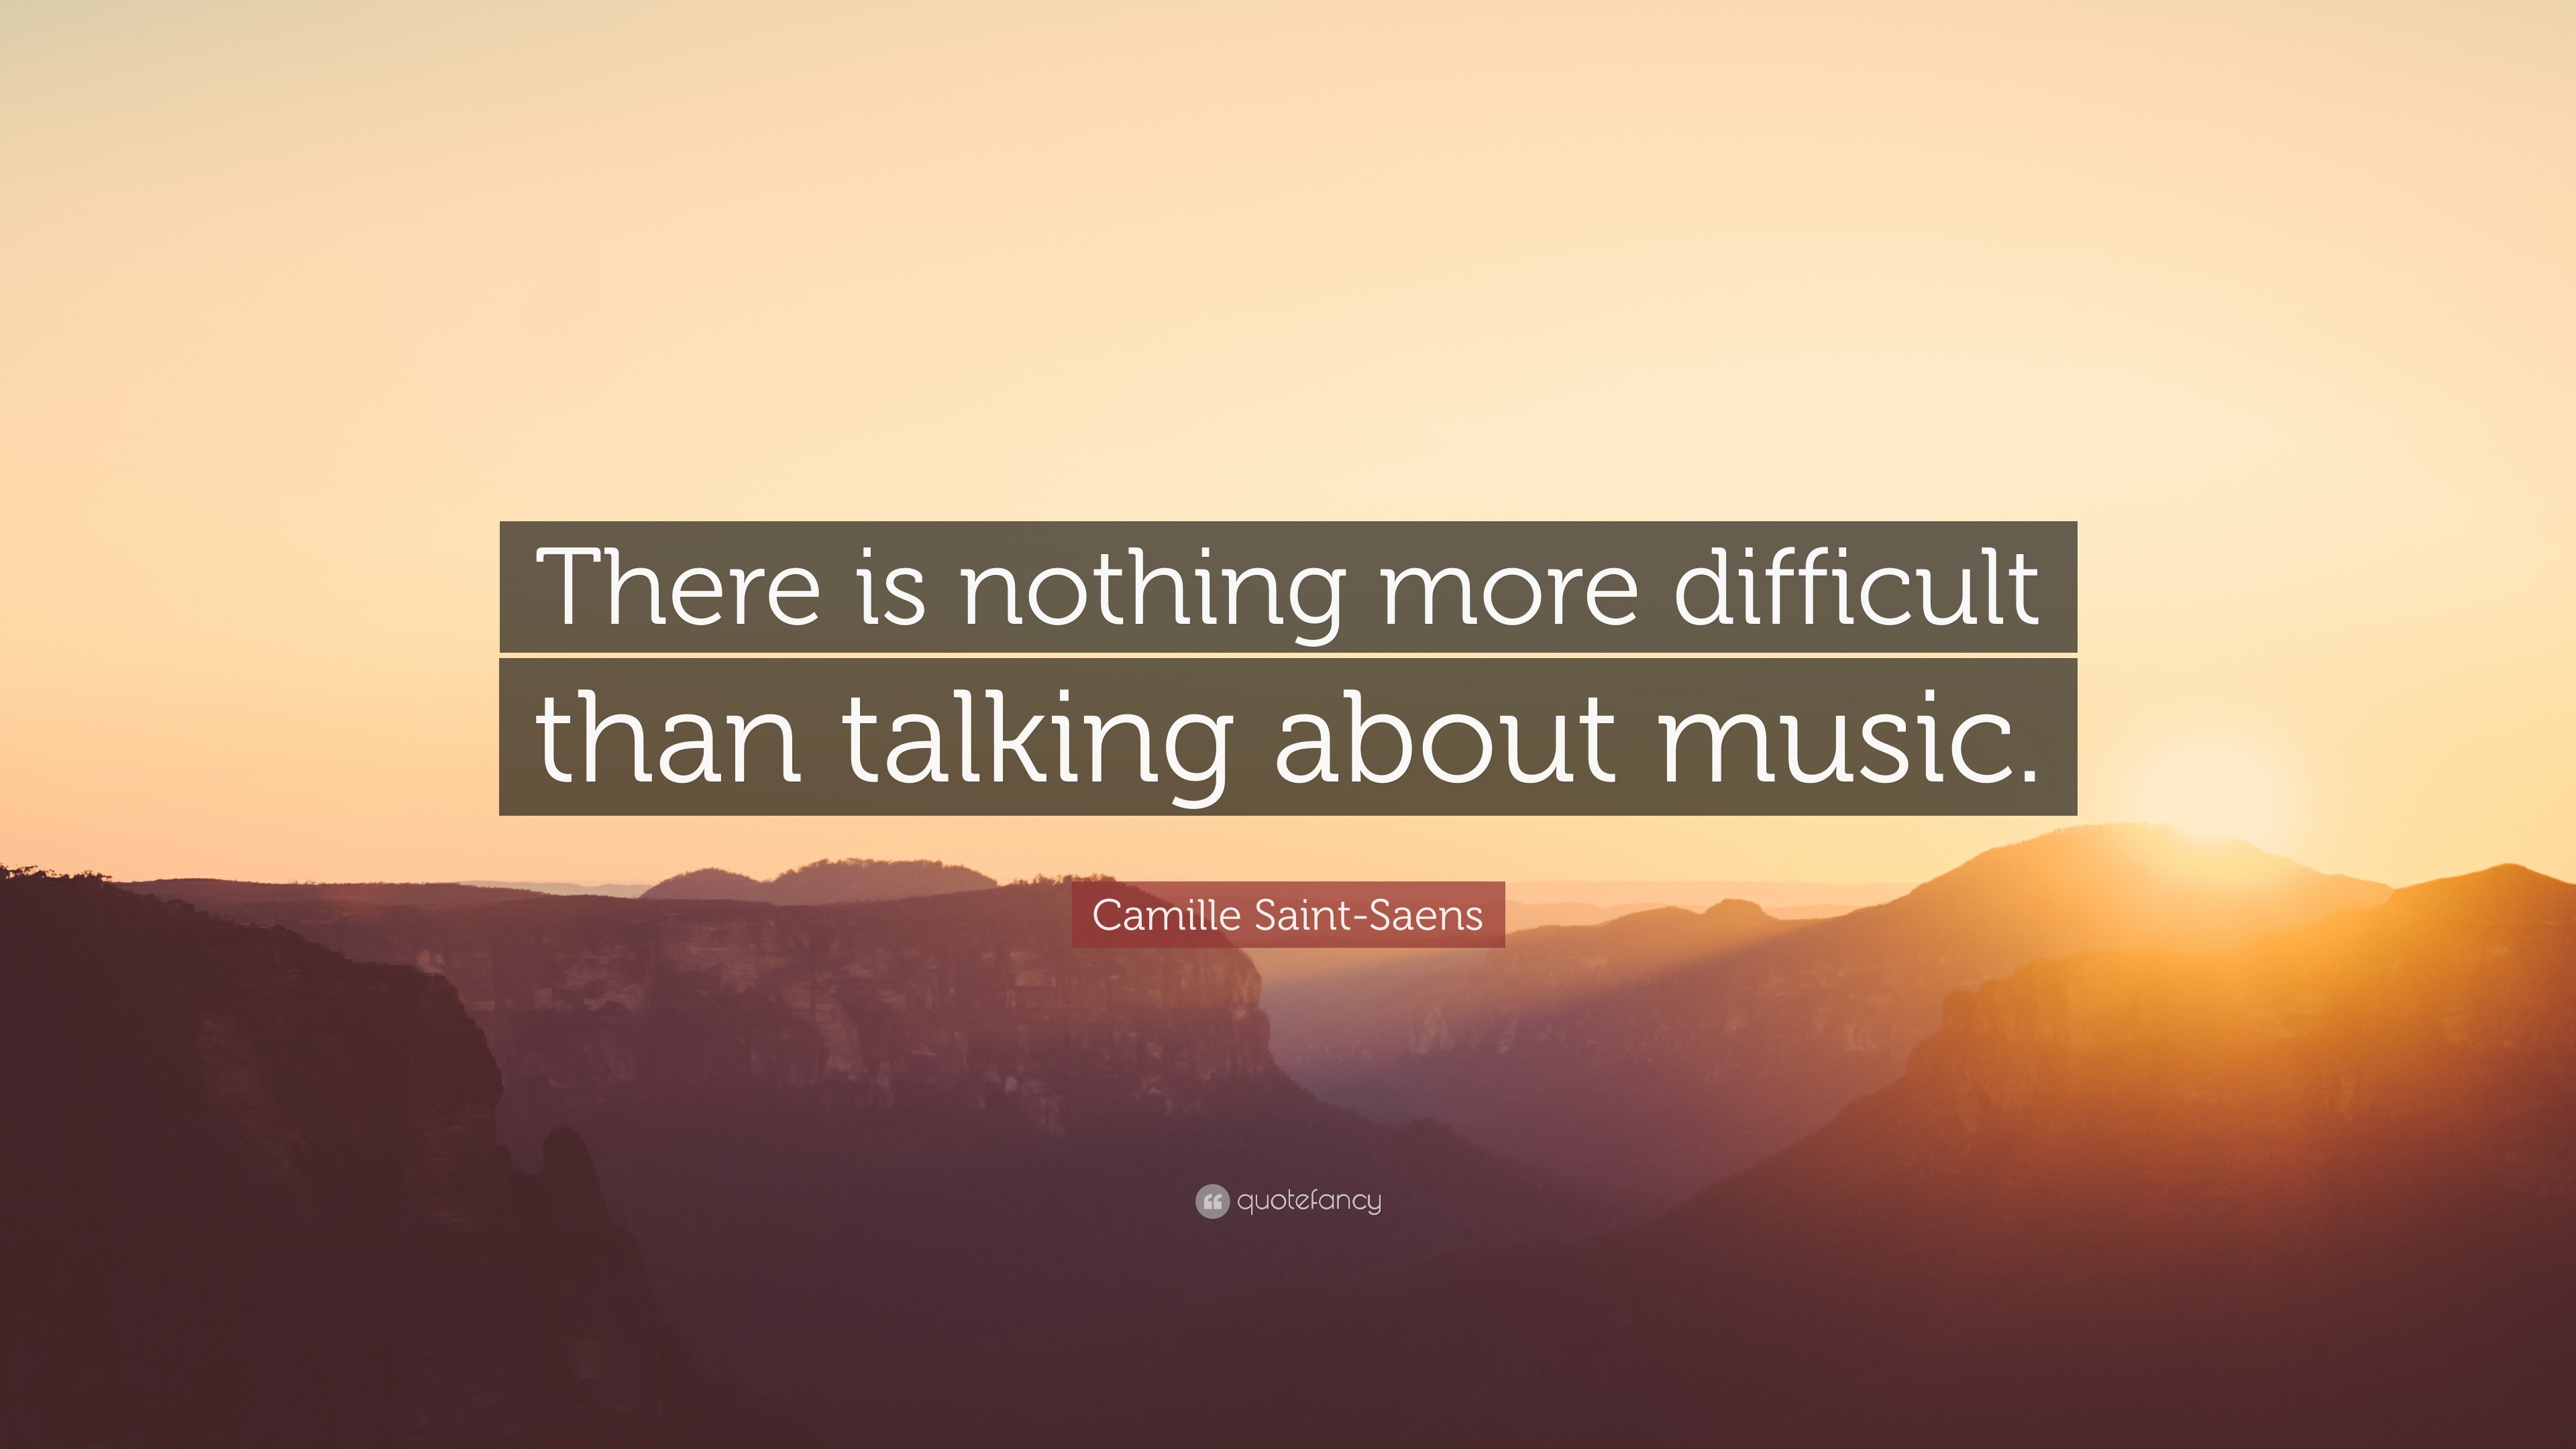 TOP 7 QUOTES BY CAMILLE SAINT-SAENS